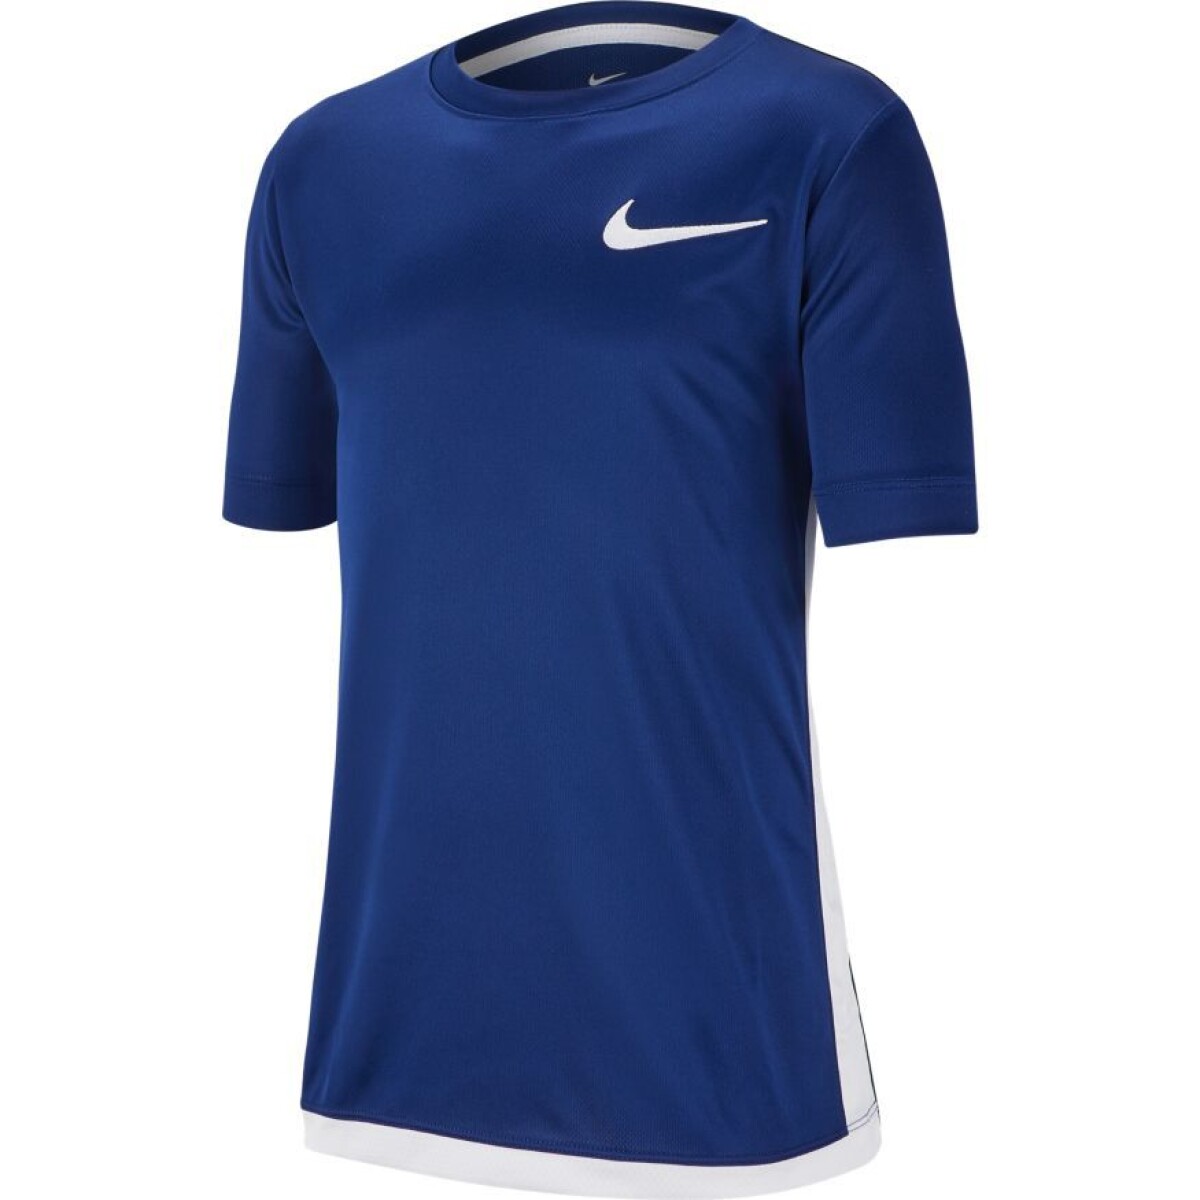 Remera Nike Training Niño Top SS Trophy BLUE VOID/WHITE/(WHITE) - Color Único 